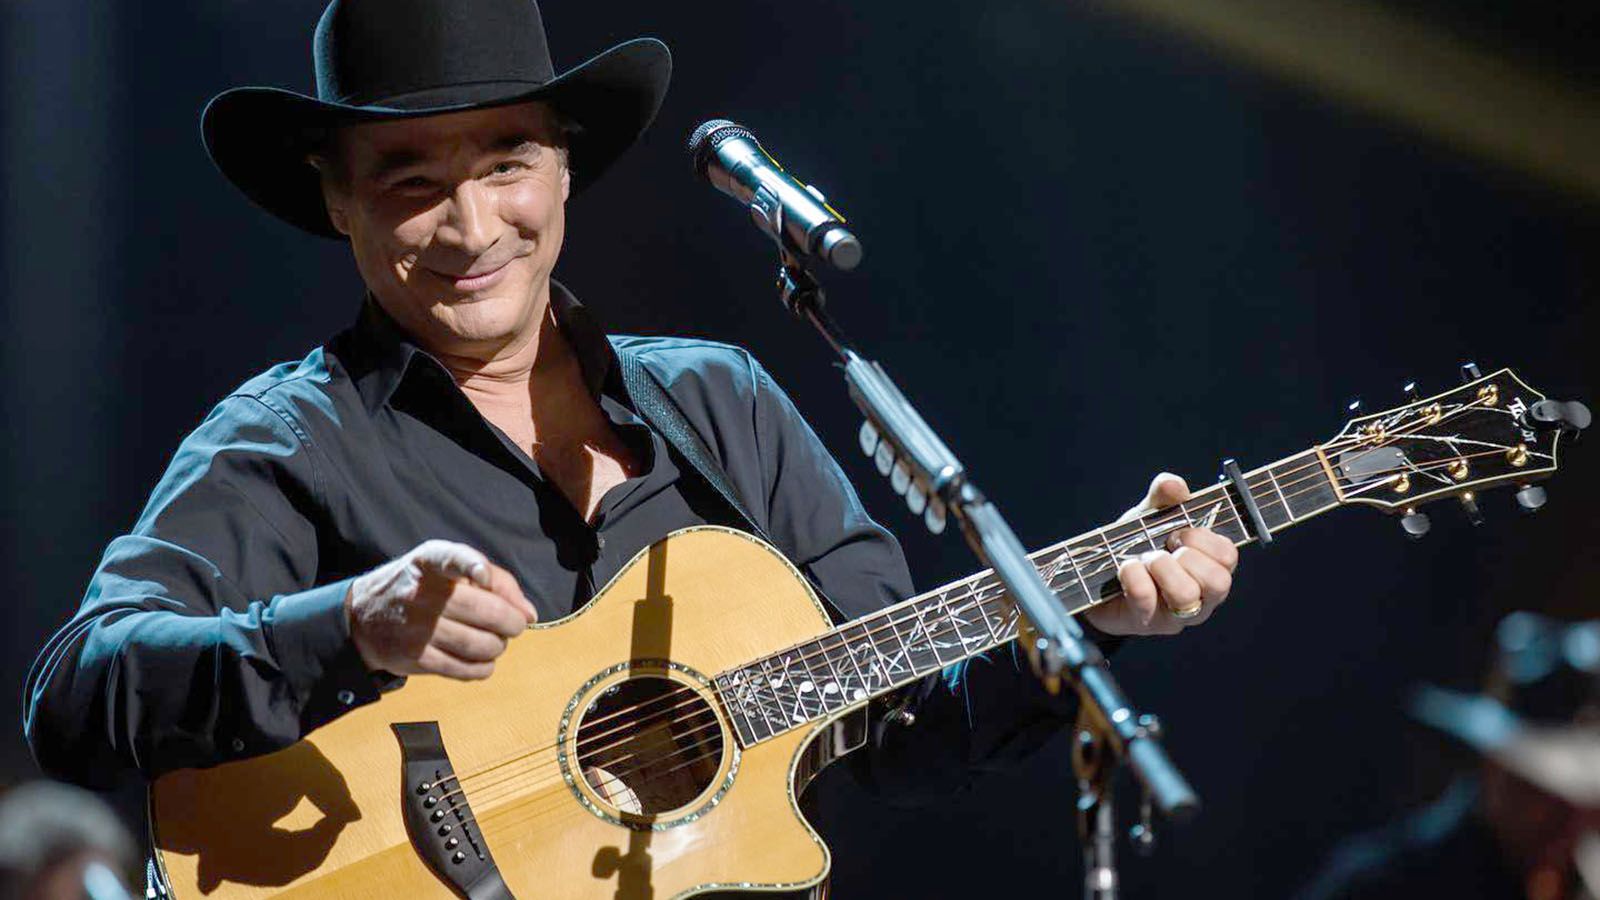 Clint Black will perform at the Indiana State Fair on July 28.